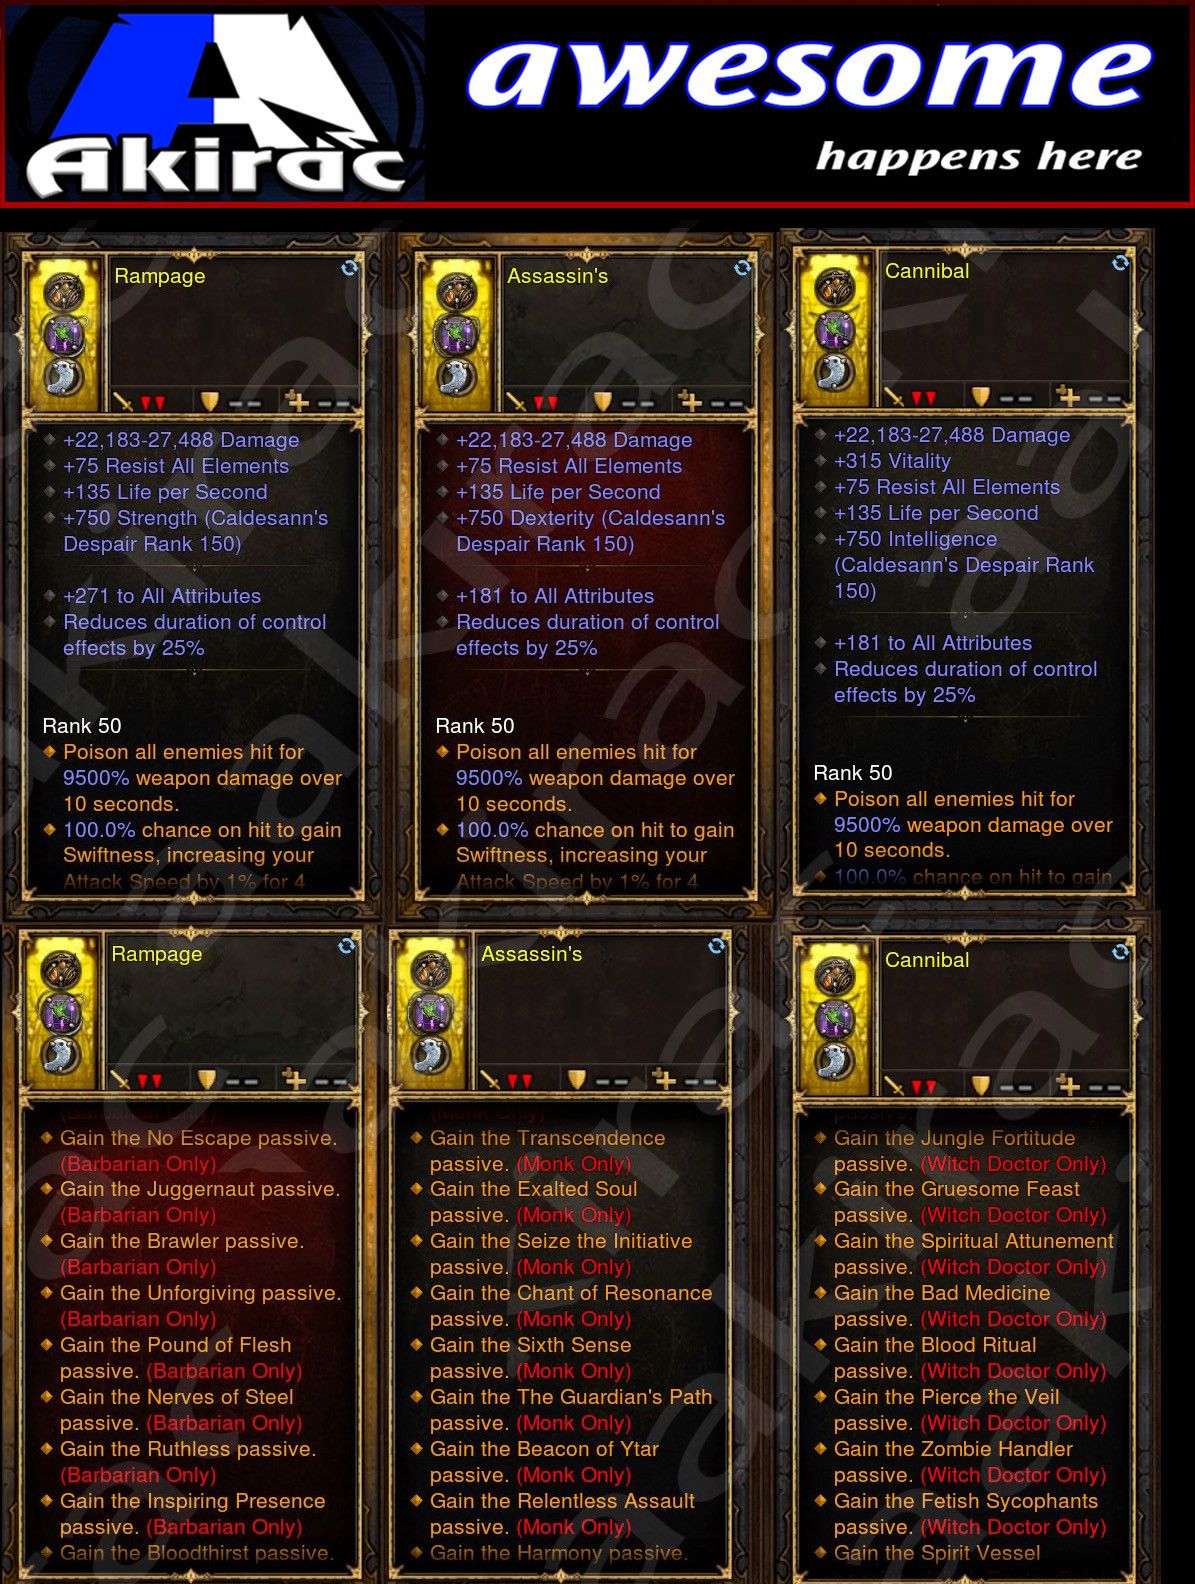 14x Passive Amulets Modded Diablo 3 Mods ROS Seasonal and Non Seasonal Save Mod - Modded Items and Gear - Hacks - Cheats - Trainers for Playstation 4 - Playstation 5 - Nintendo Switch - Xbox One